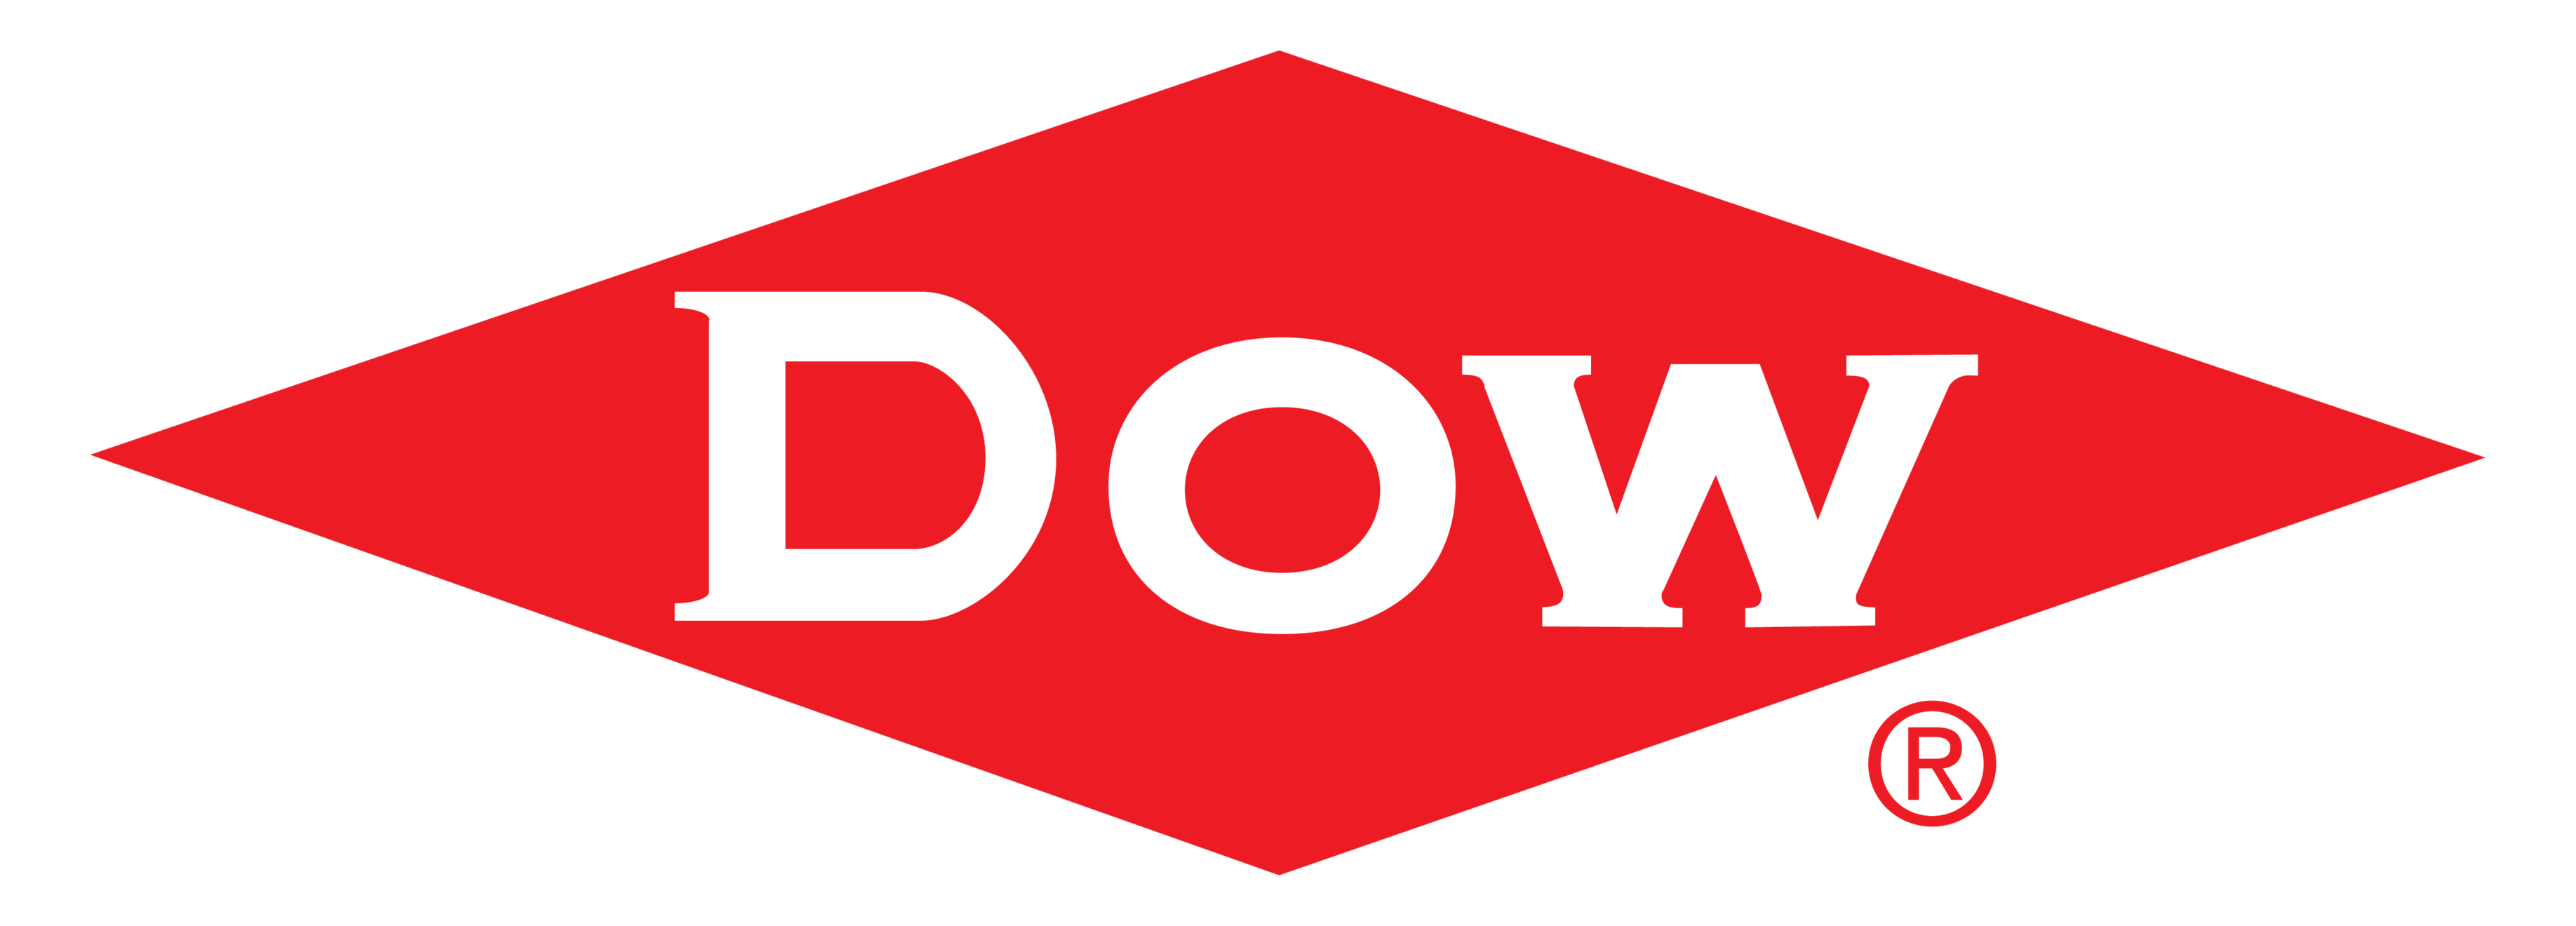 Sponsored in part by Dow Chemicals Company